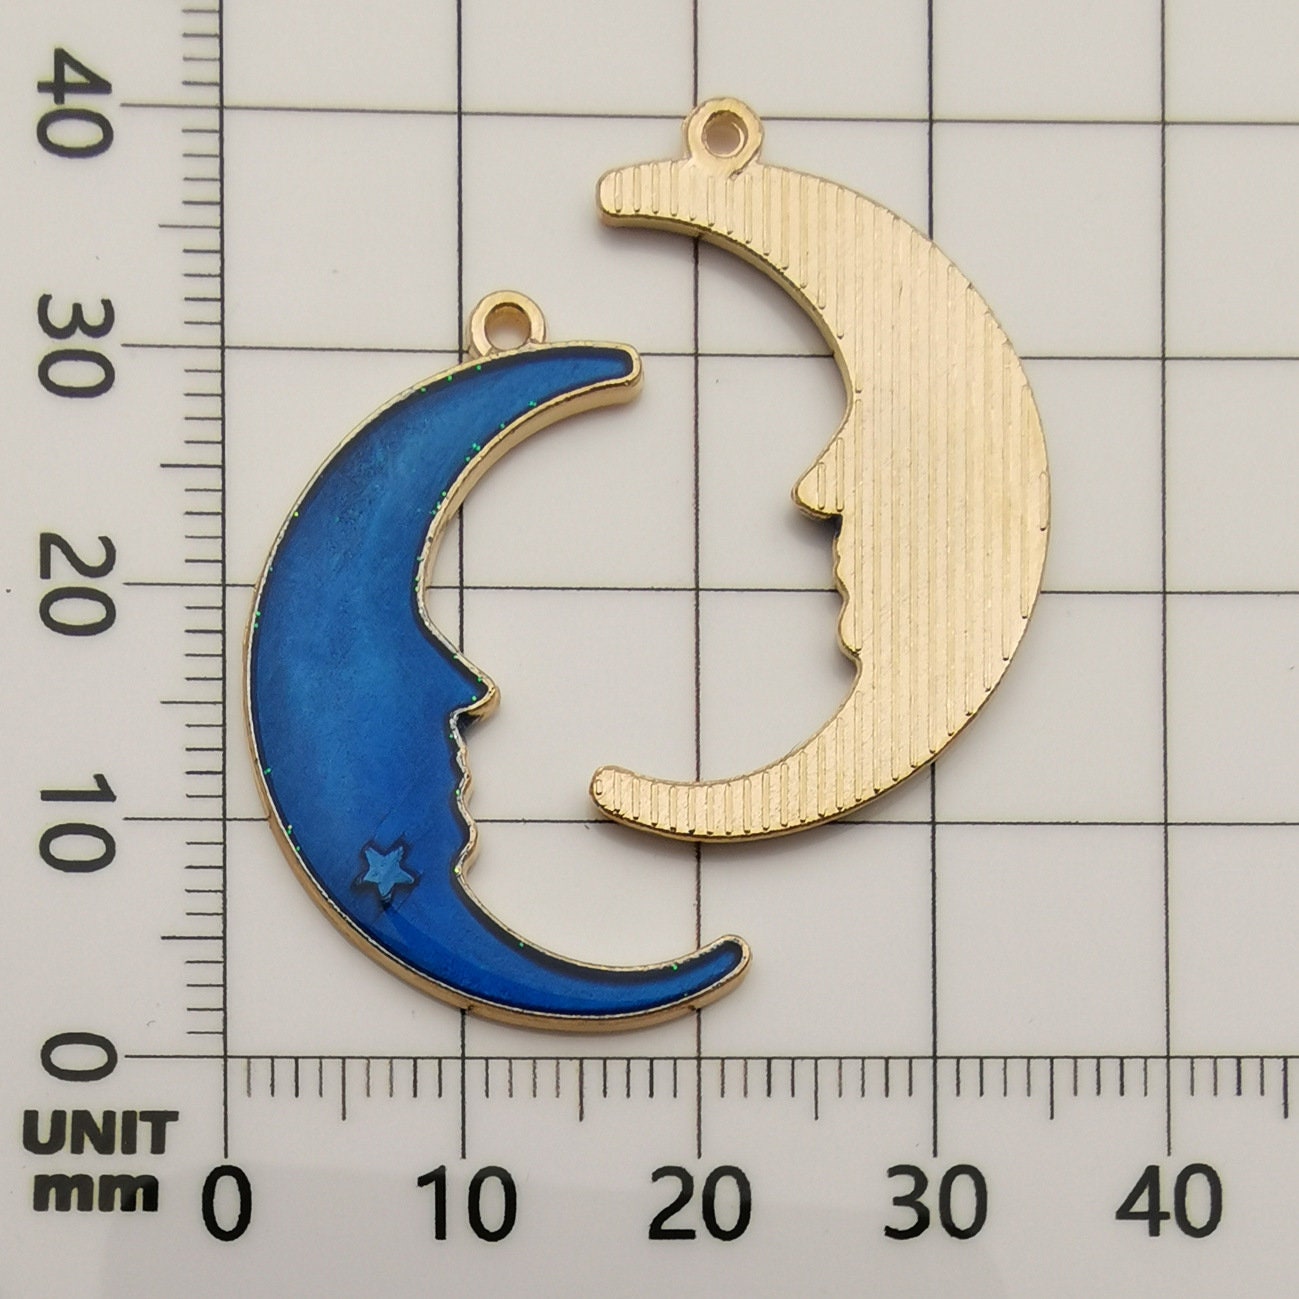 8 celestial assorted enamel charms, Nickel free metal pendants, Cute mixed shapes for jewelry making